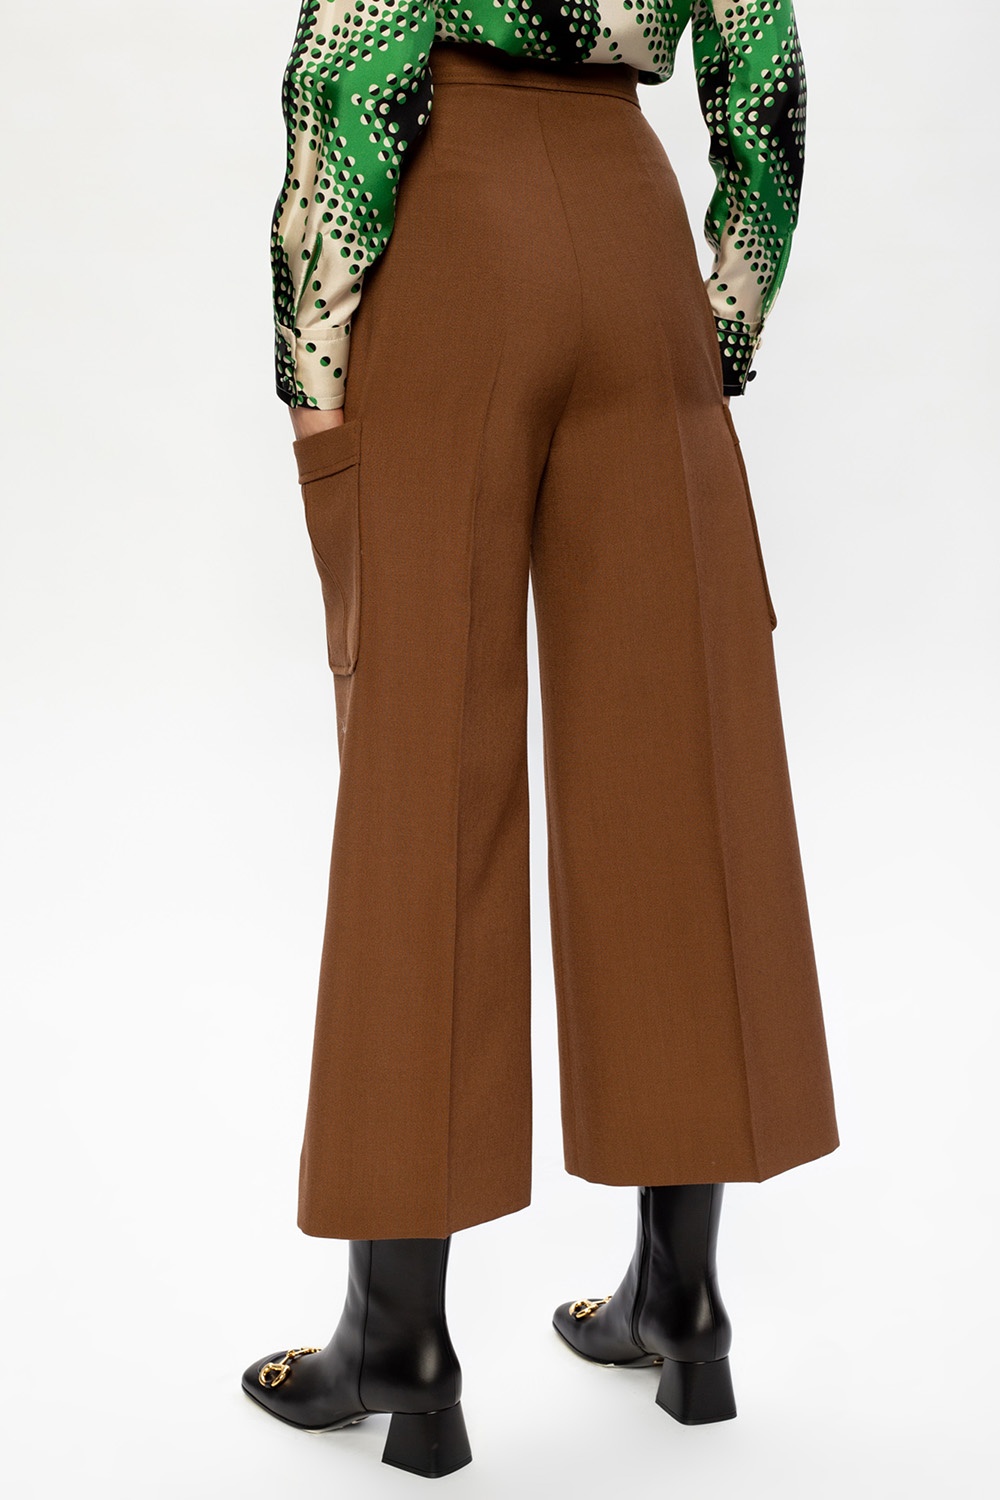 Gucci Womens Wide Leg Pants  Clothing  Stylicy India